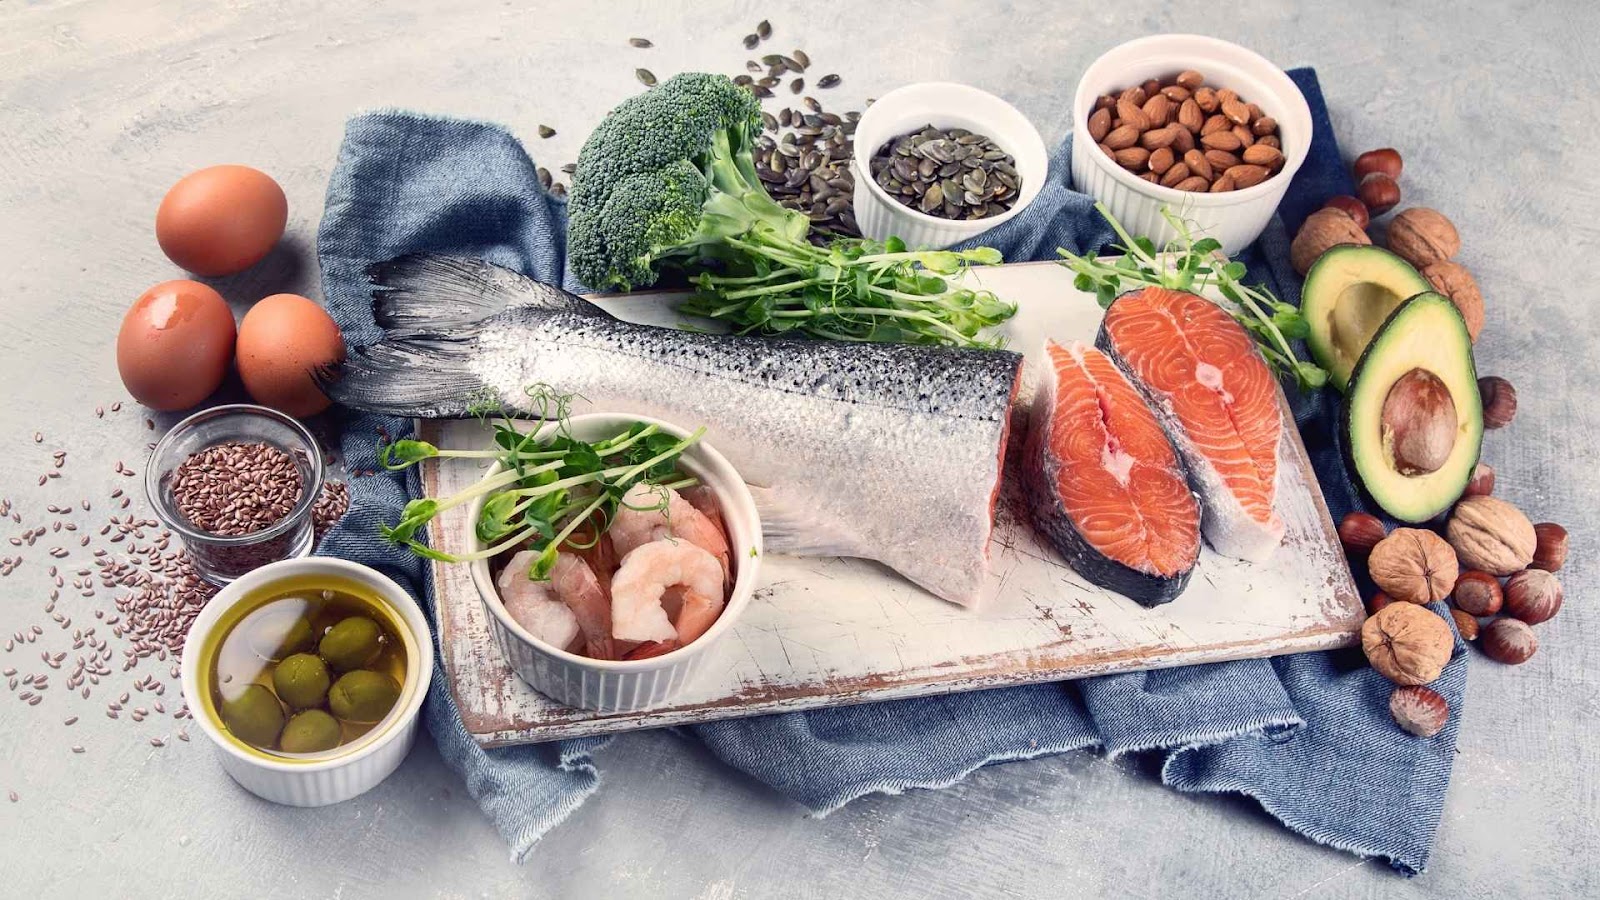 A variety of foods reich in Omega 3